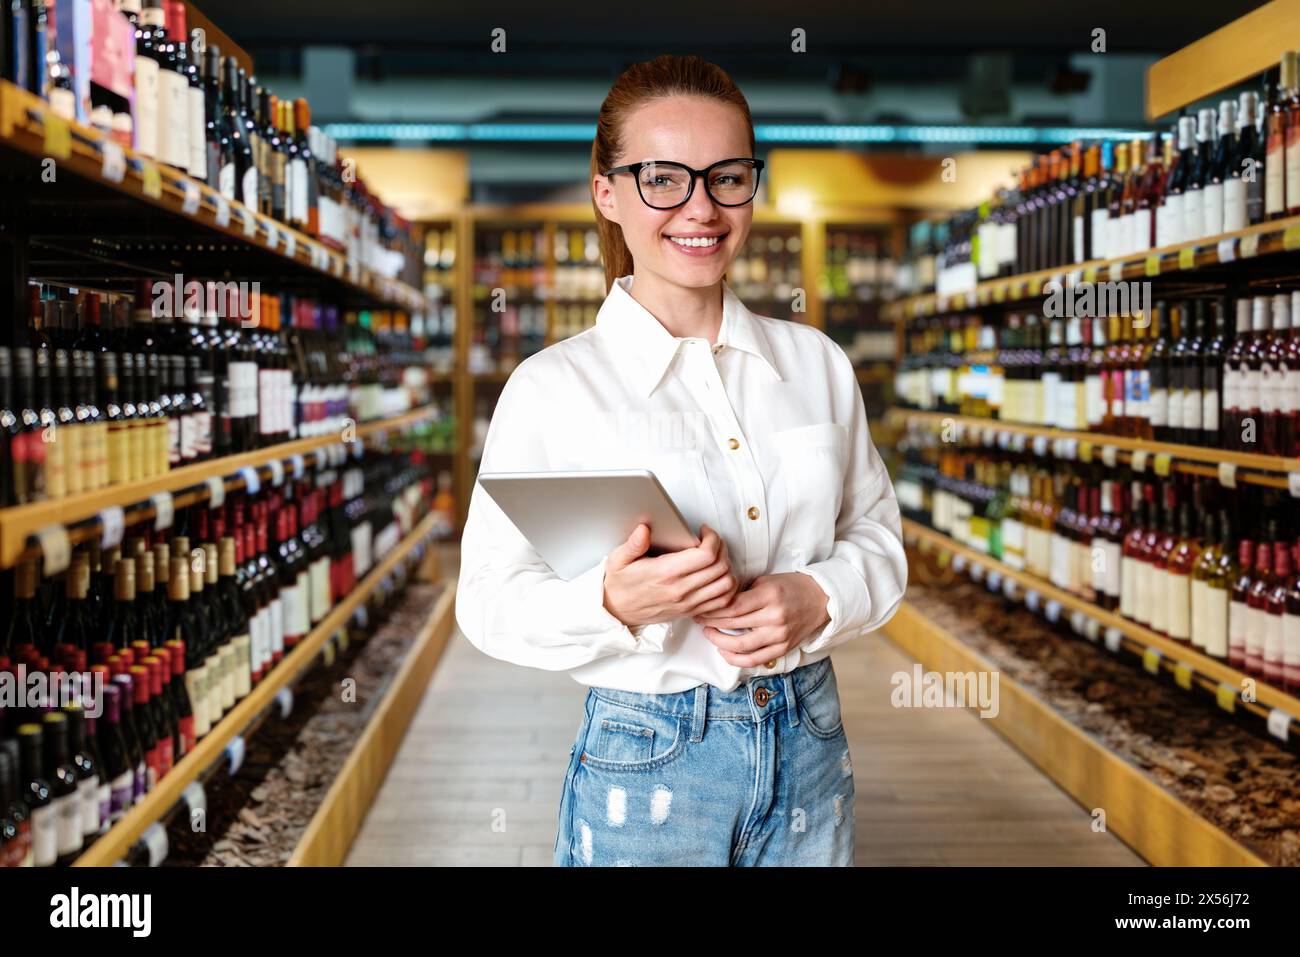 Woman retail manager with digital tablet in her hands stands in wine liquor store and smiling. Businesswoman works in retail. Stock Photo